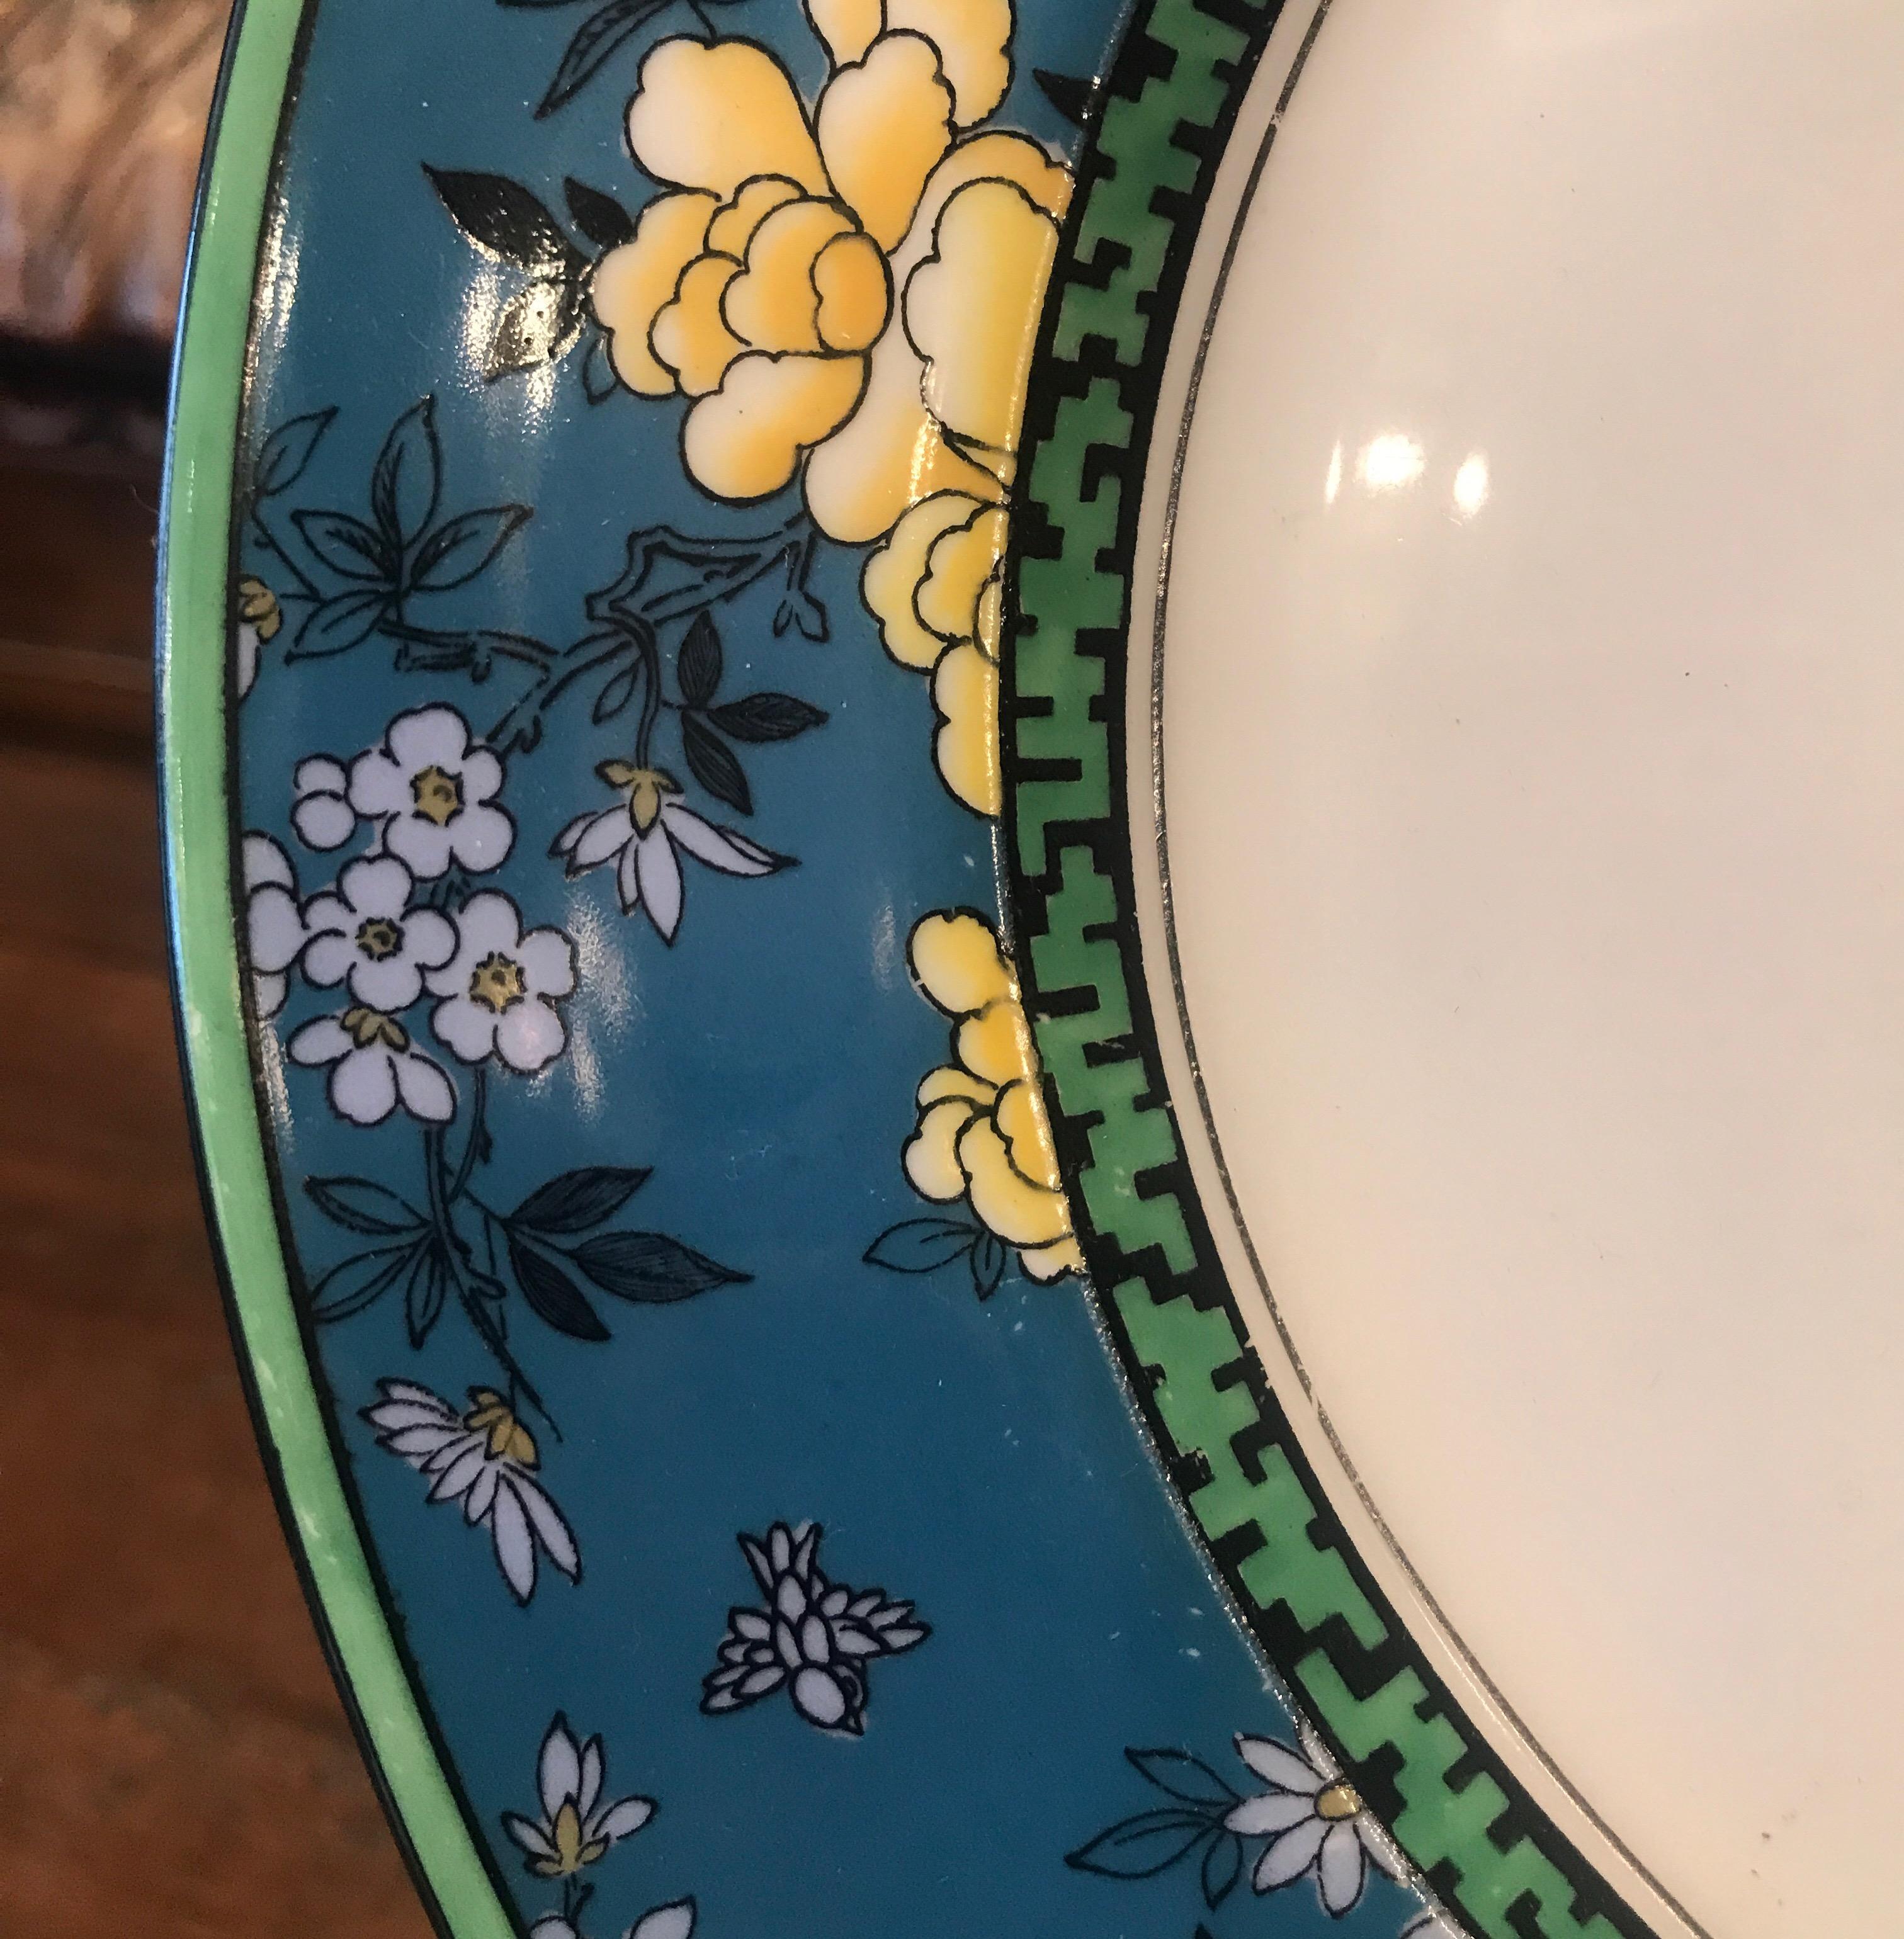 Vibrant set of 12 Royal Doulton service plates with rich blue, black, yellow painted Asian Art Deco borders. High style and would look sensational in a cabinet.
These plates were designed by a top Doulton designer, Robert Allen.
Robert Allen, was